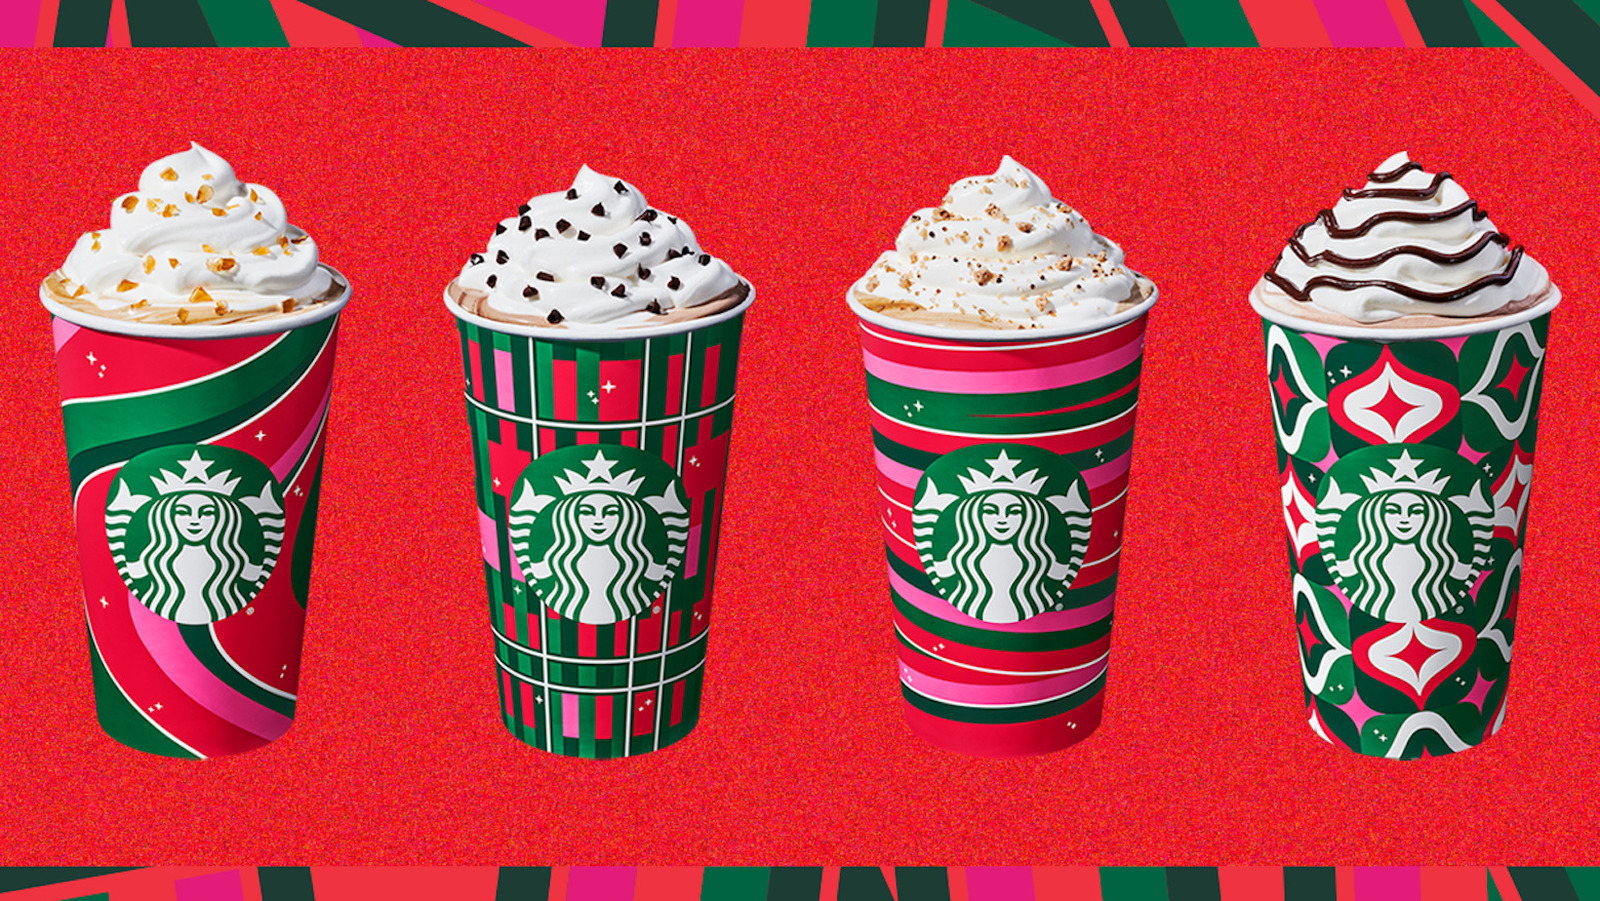 Starbucks Goes Full Holiday Mode With New Menu Items Cocktails And Festive Cups 2617